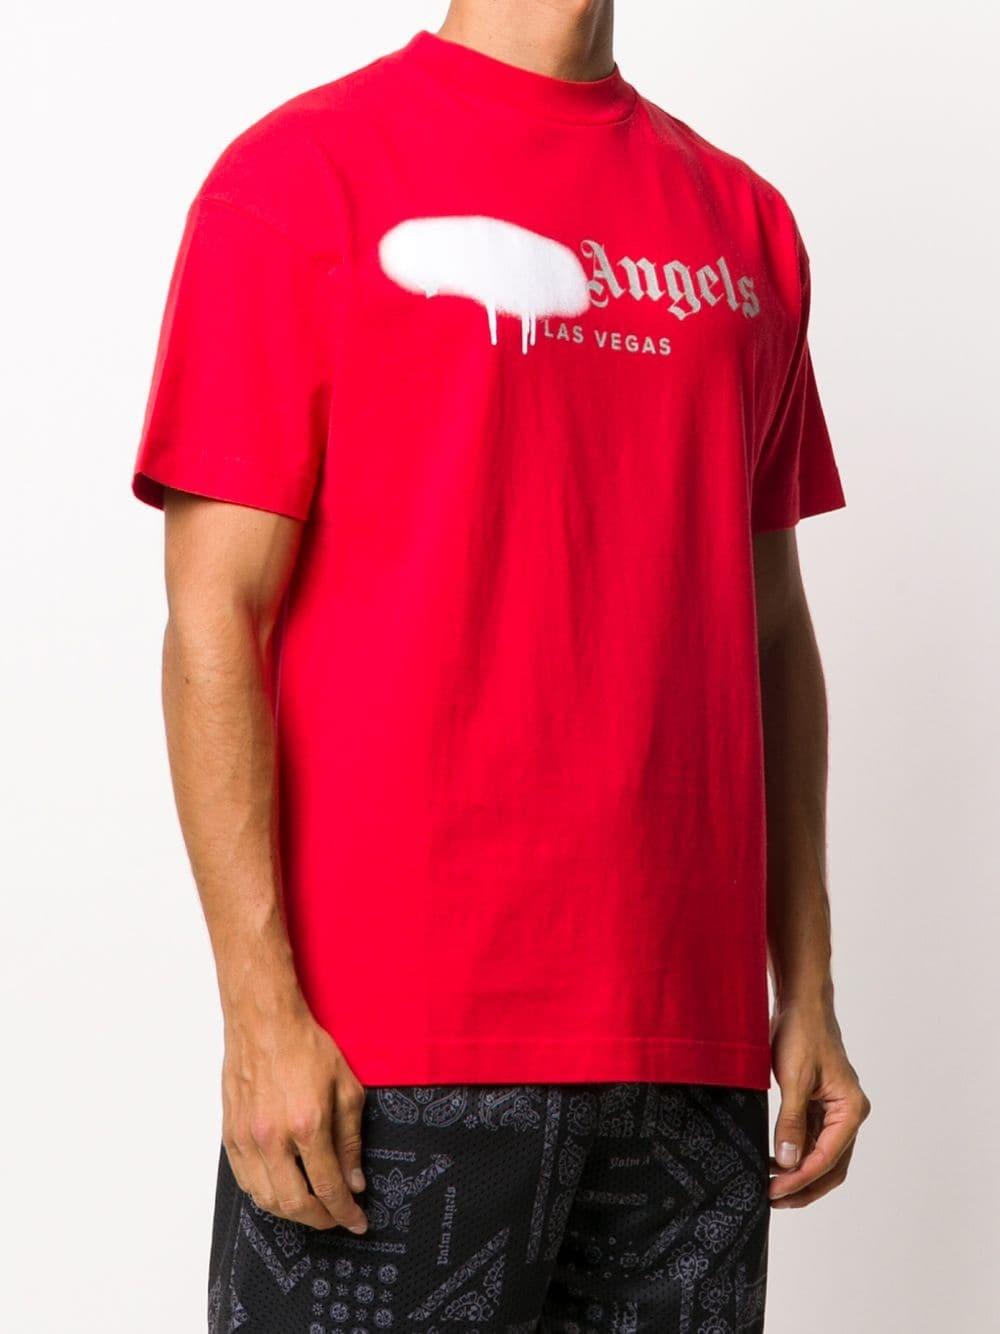 LAS VEGAS S/S SPRAYED T-SHIRT in red - Palm Angels® Official